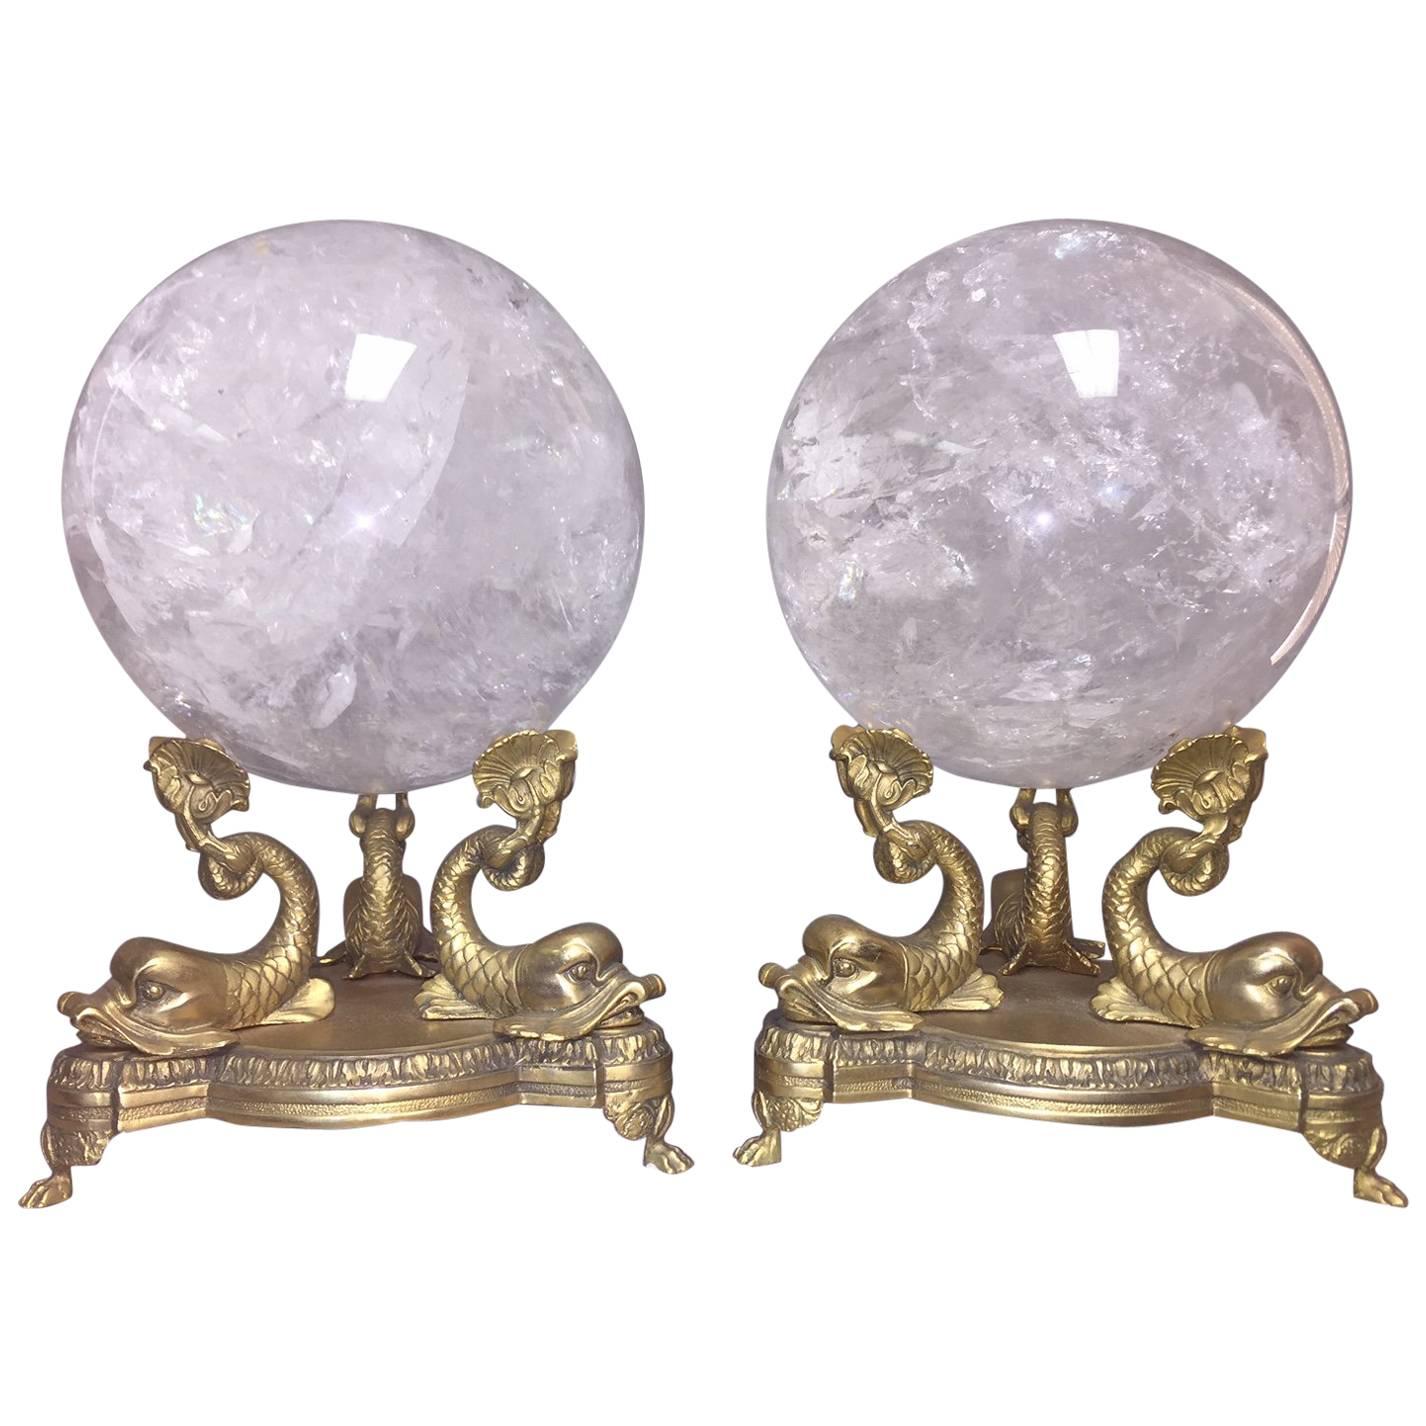 Pair of Neoclassical Rock Crystal Spheres on Bronze Bases For Sale